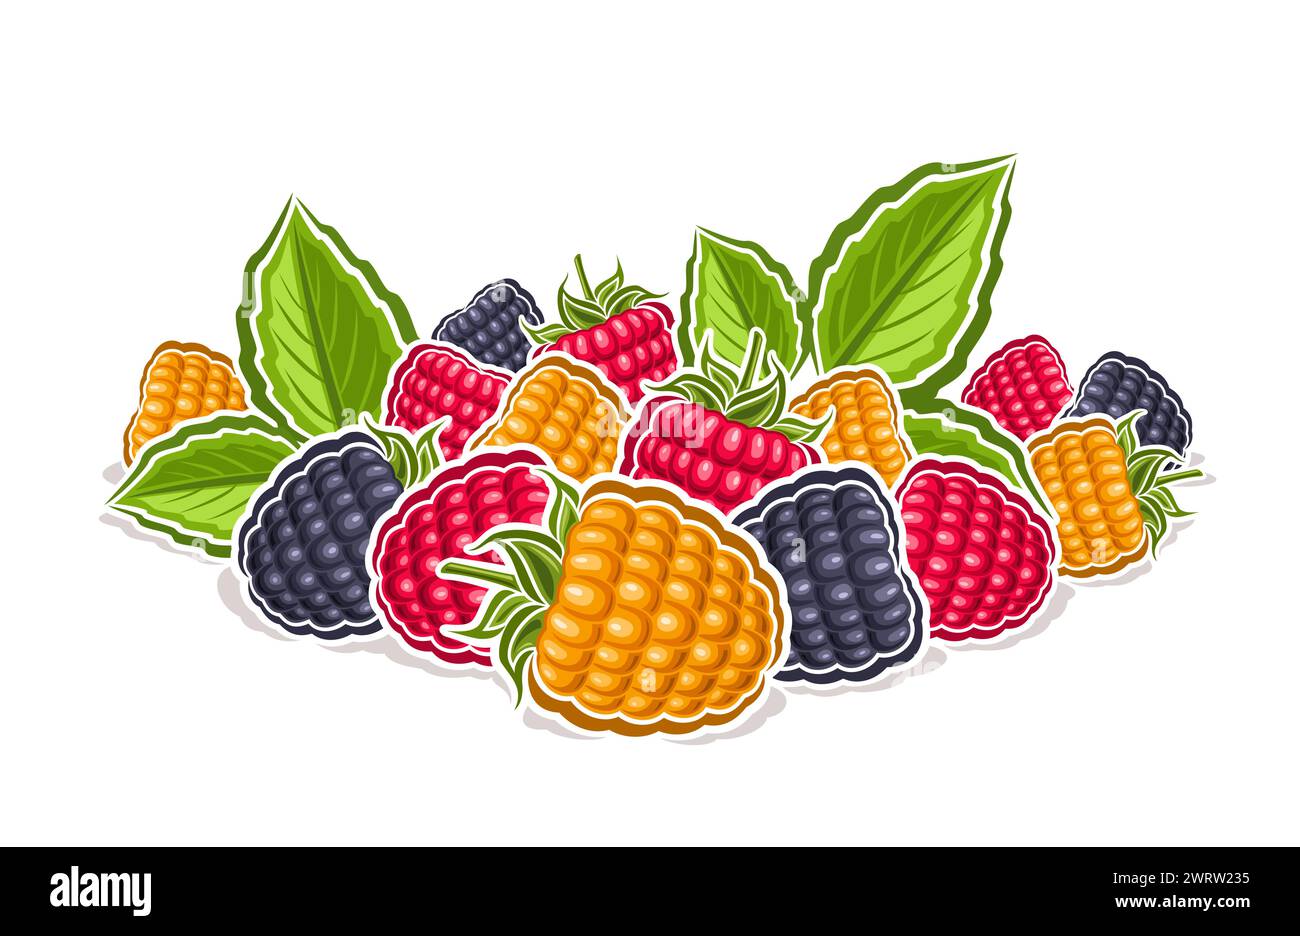 Vector logo for Wild Berry, decorative horizontal poster with outline illustration of colorful raspberry composition with green sprig, cartoon design Stock Vector